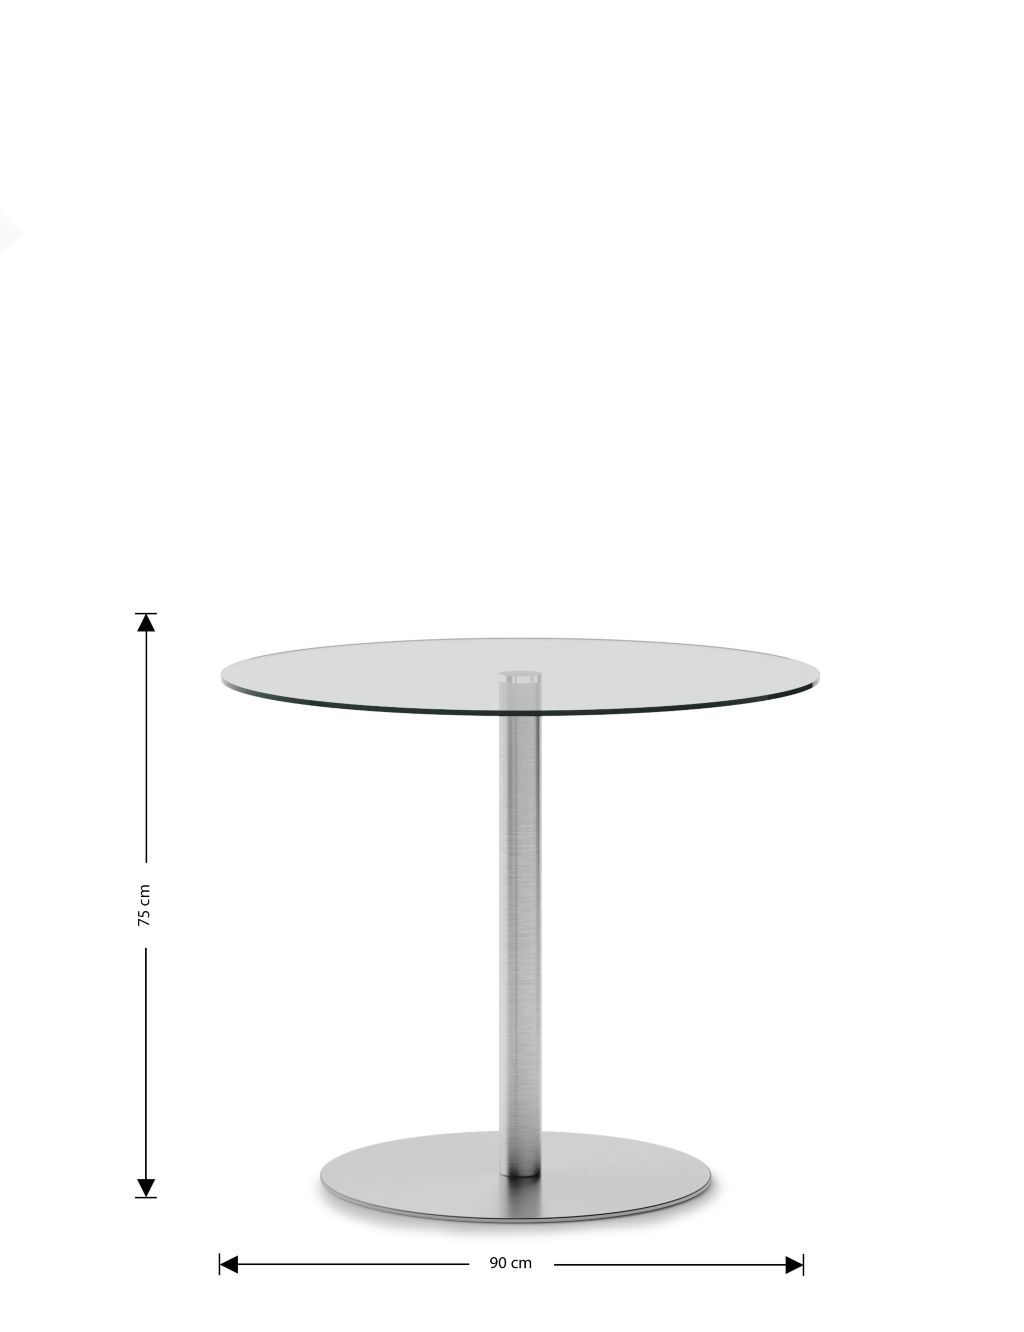 Huxley 4 Seater Pedestal Dining Table 5 of 8